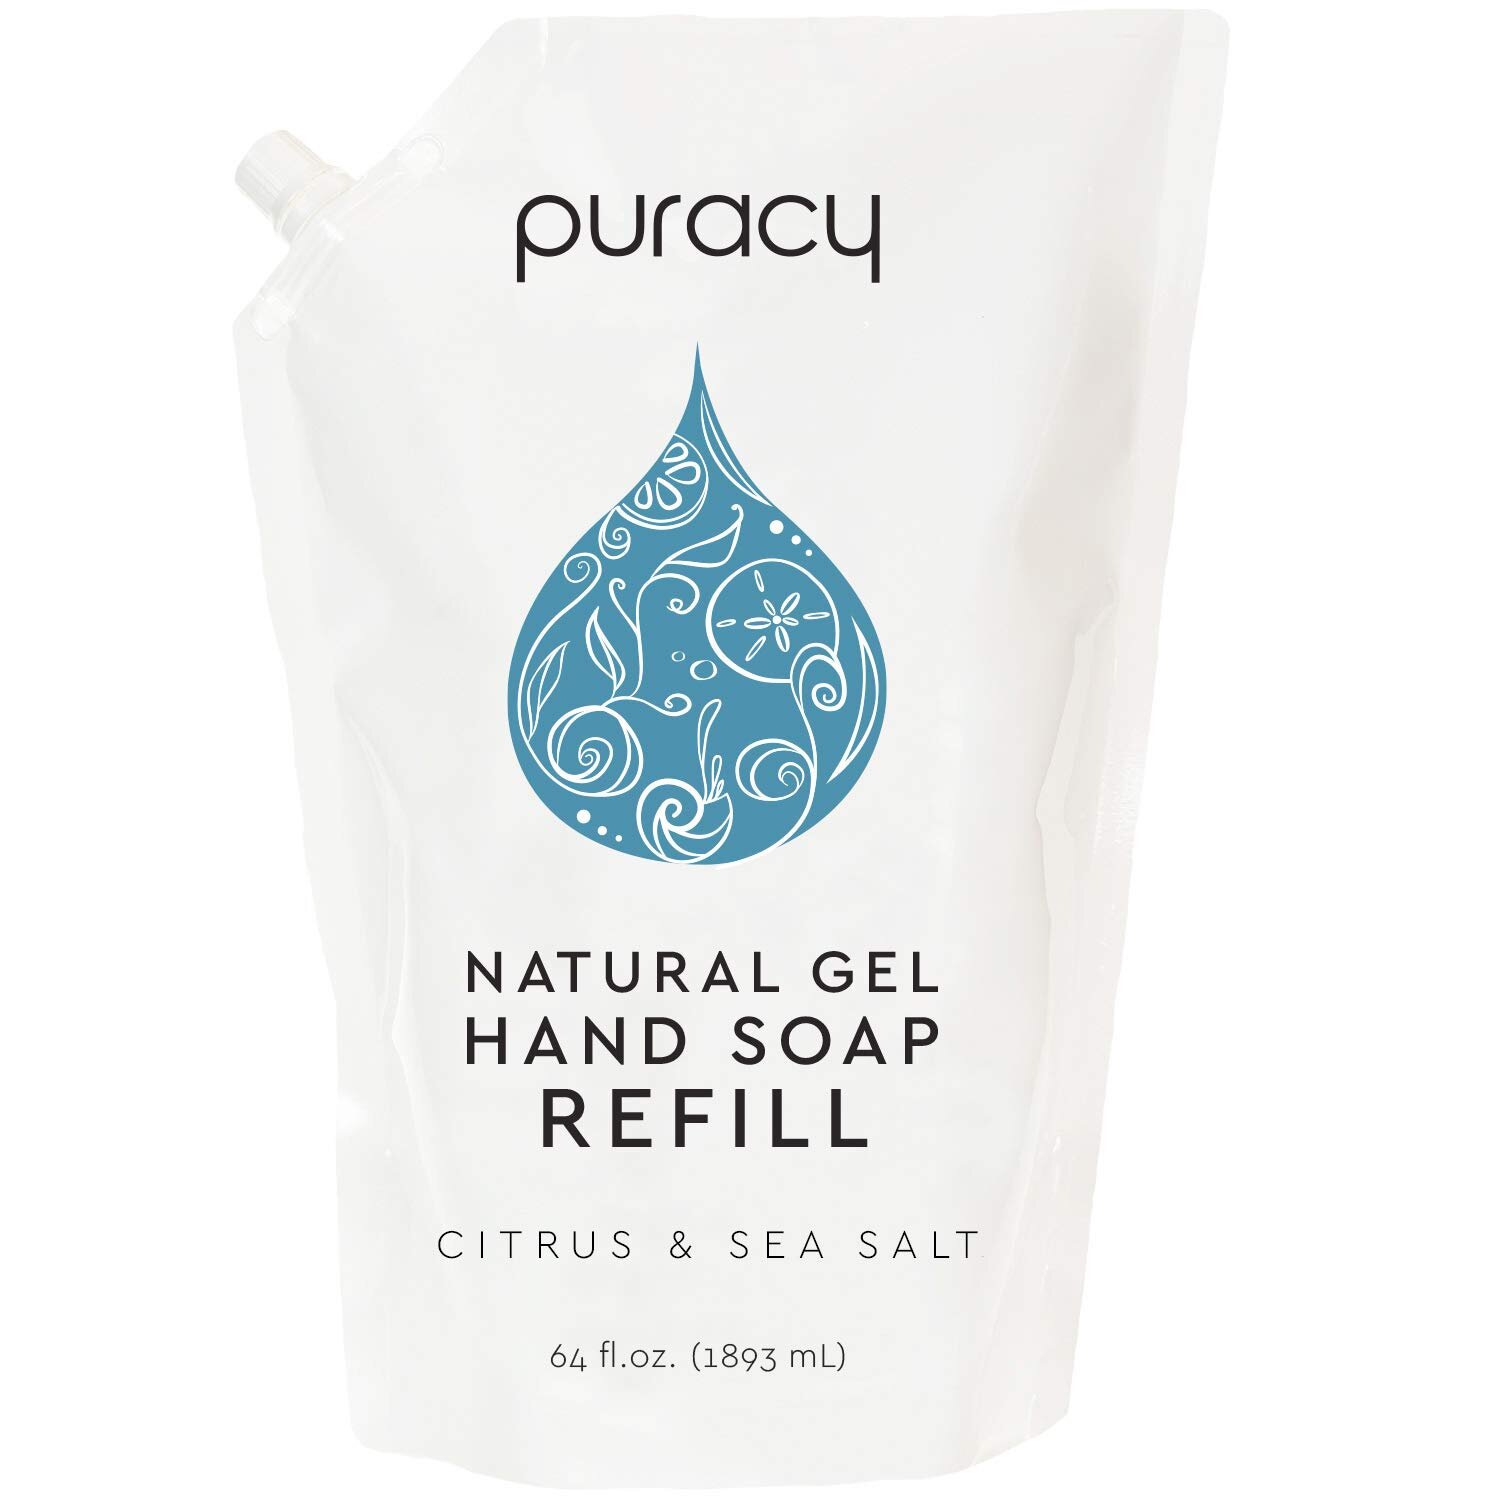 We tried Puracy's natural gel hand soap refills, and here's what